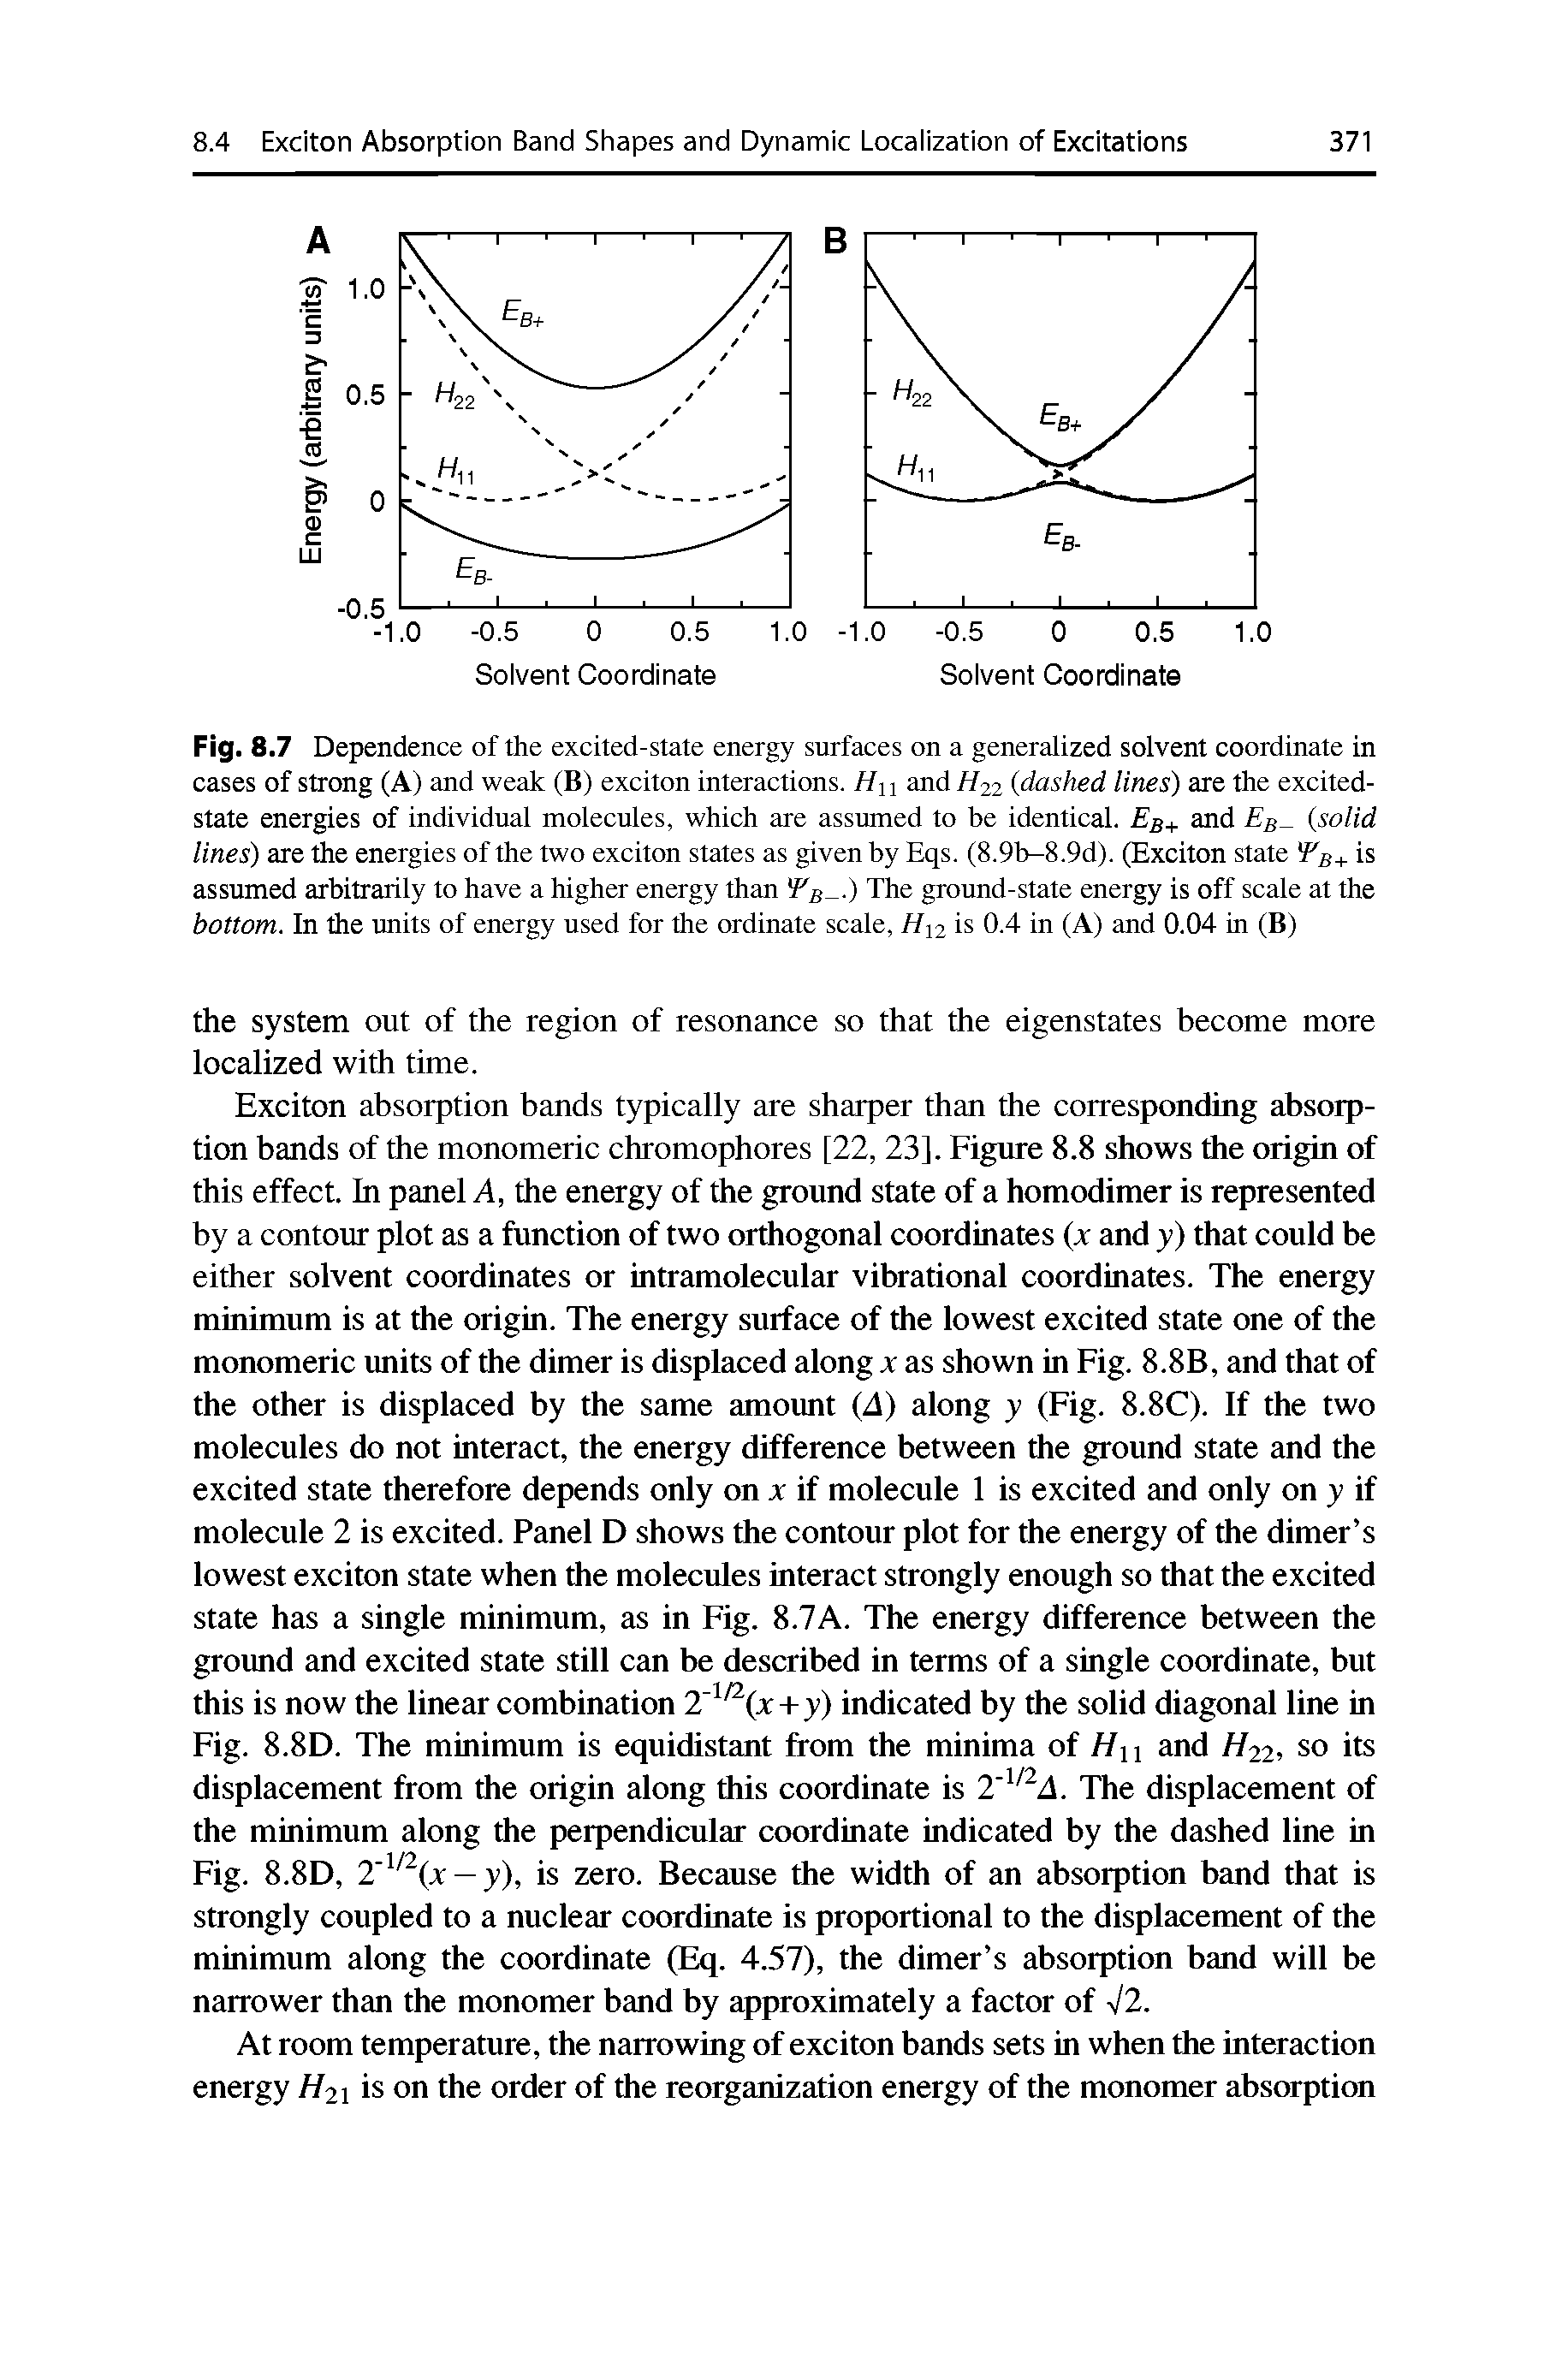 Fig. 8.7 Dependence of the excited-state energy surfaces on a generalized solvent coordinate in cases of strong (A) and weak (B) exciton interactions. Hu and 7/22 (dashed lines) are the excited-state energies of individual molecules, which are assumed to be identical. Eb+ and (solid lines) are the energies of the two exciton states as given by Eqs. (8.9b-8.9d). (Exciton state Fb+ is assumed arbitrarily to have a higher energy than I b- ) Th ground-state energy is off scale at the bottom. In the units of energy used for the ordinate scale, H12 is 0.4 in (A) and 0.04 in (B)...